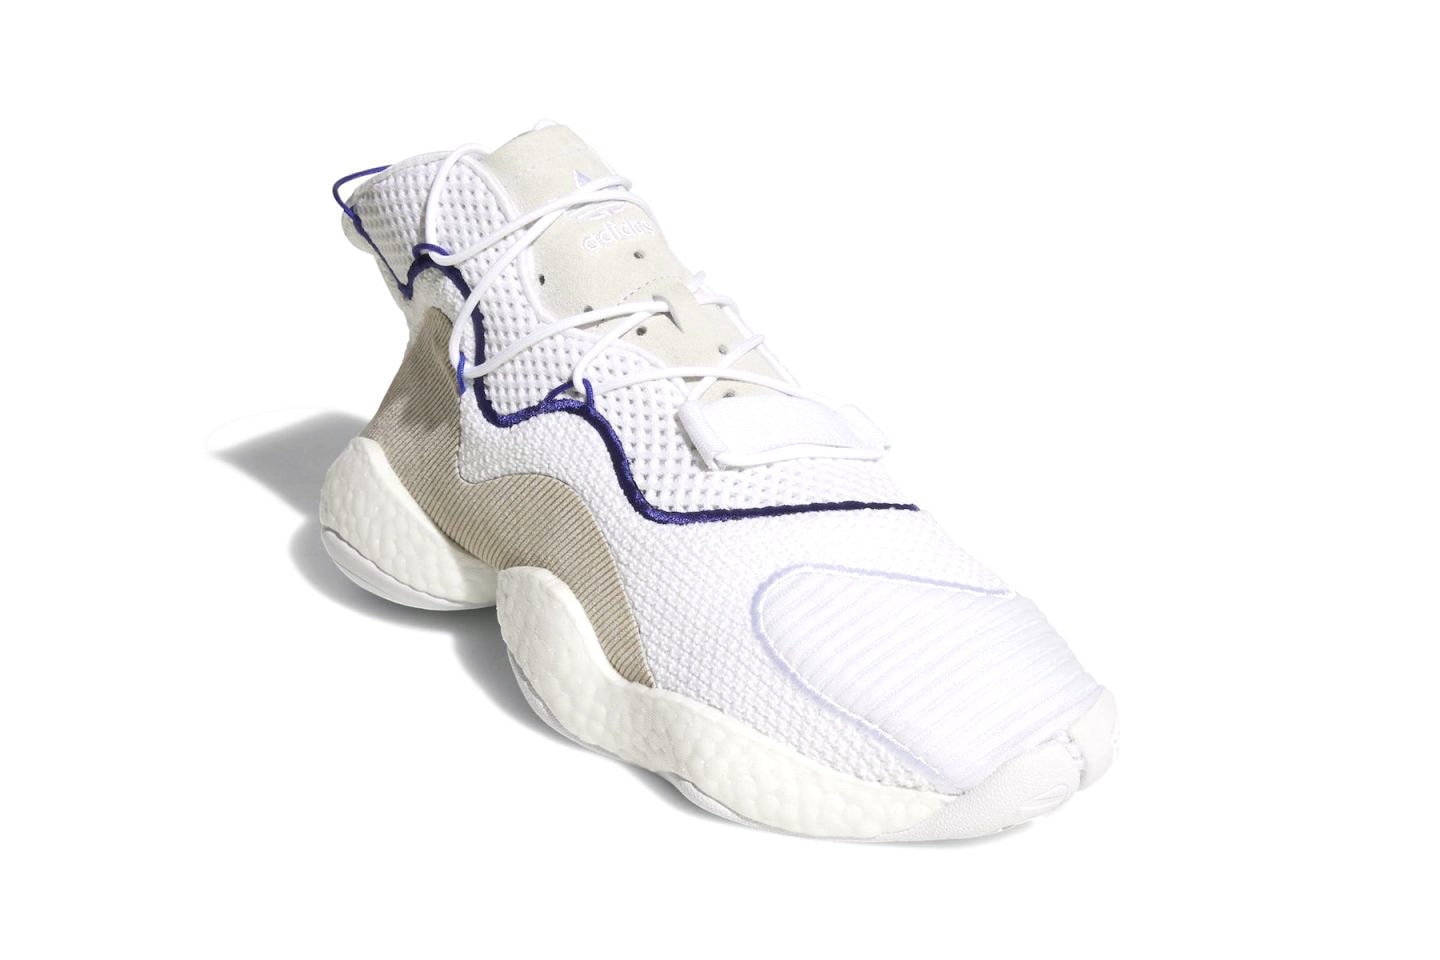 adidas Originals Crazy BYW LVL 1 white release date March 1 Sneakers Shoes Footwear